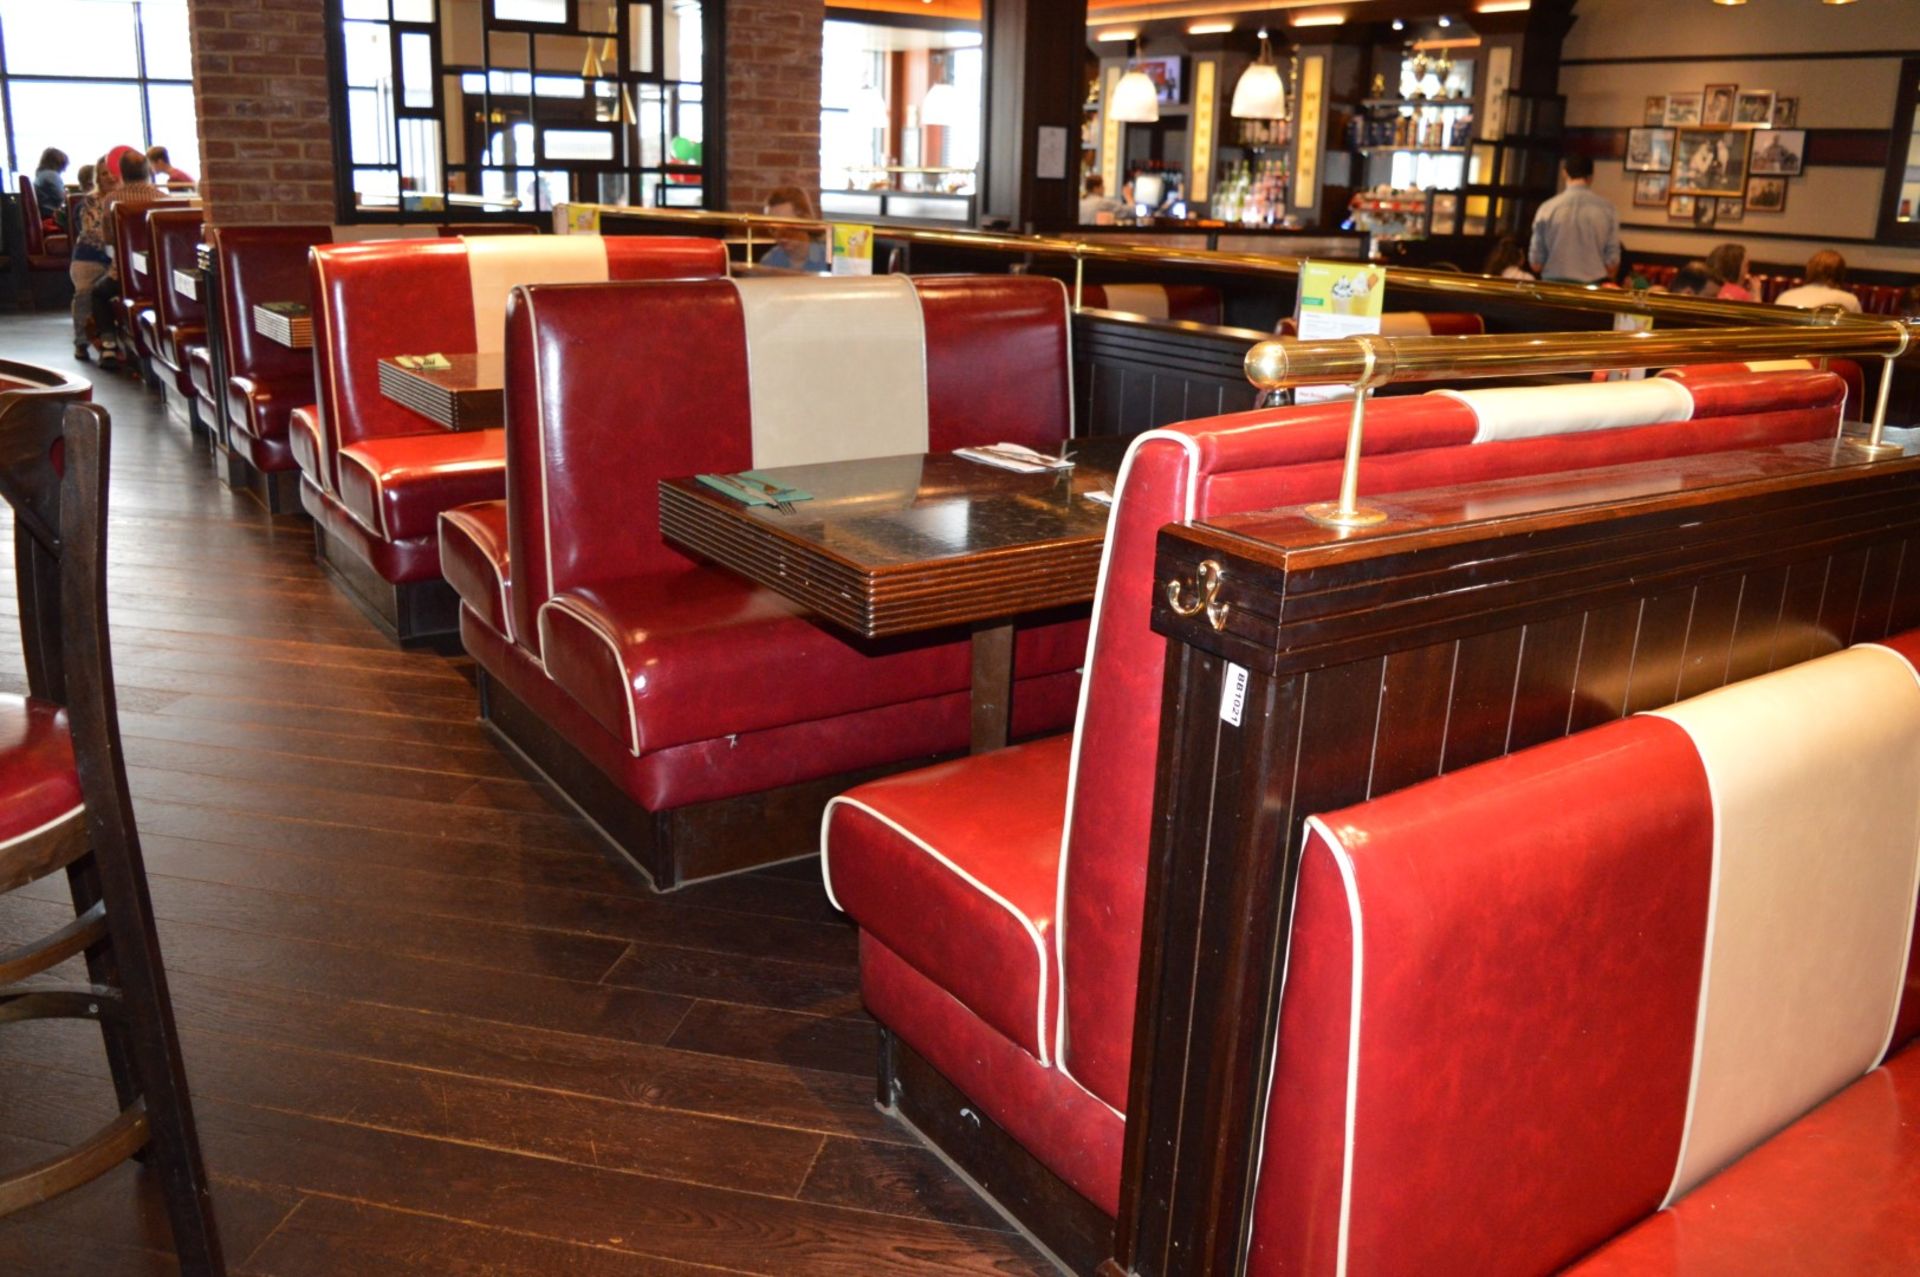 1 x Selection of Seating Booths in a 1950's Retro American Diner Design Supplied in Good Condition - - Image 6 of 7